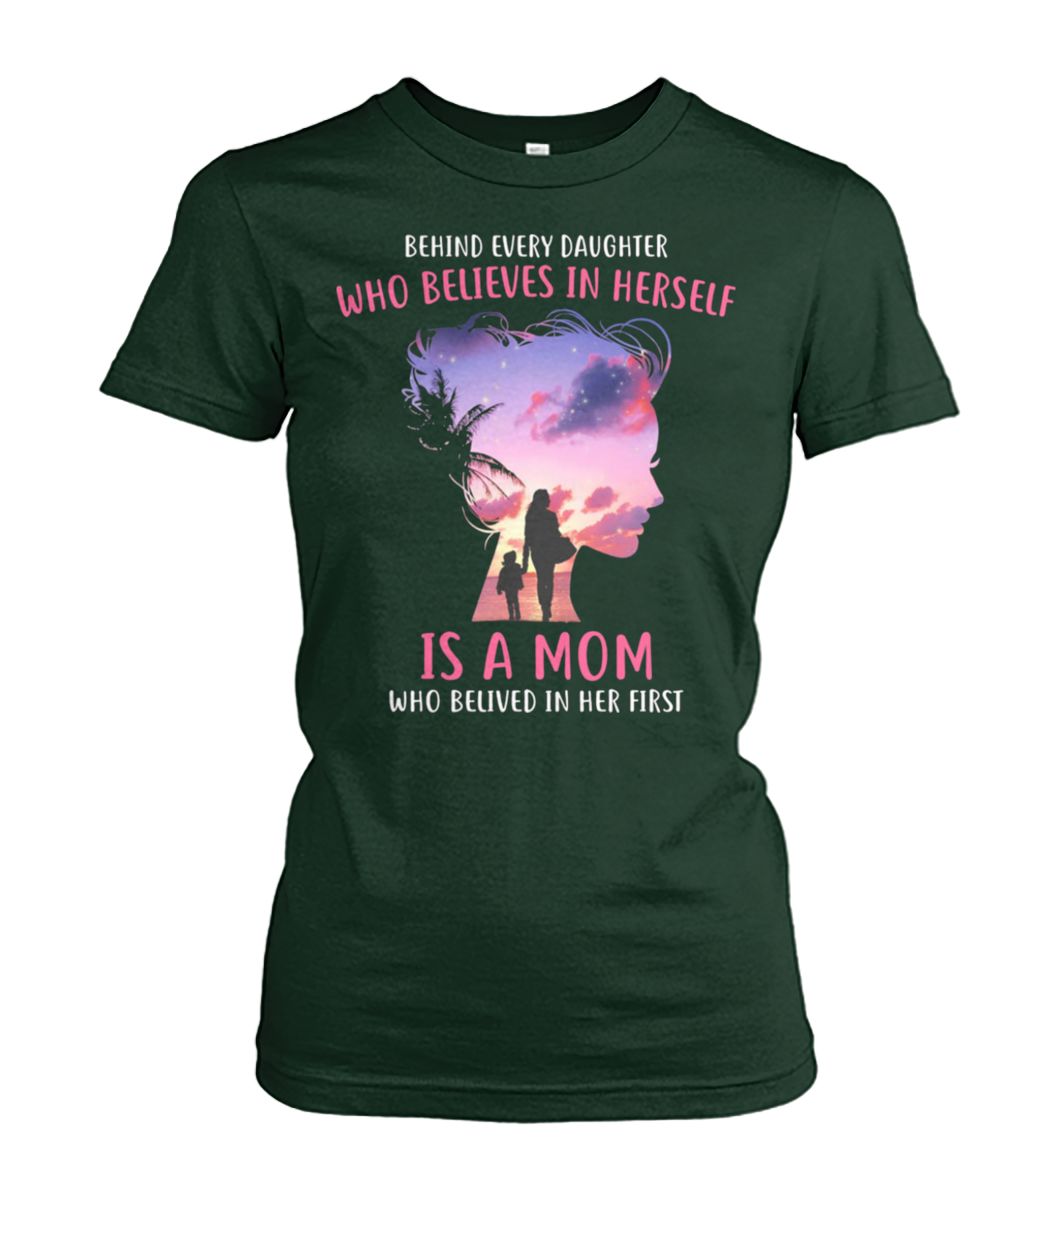 Behind every daughter who believes in herself is a mom who believed in her first women's crew tee